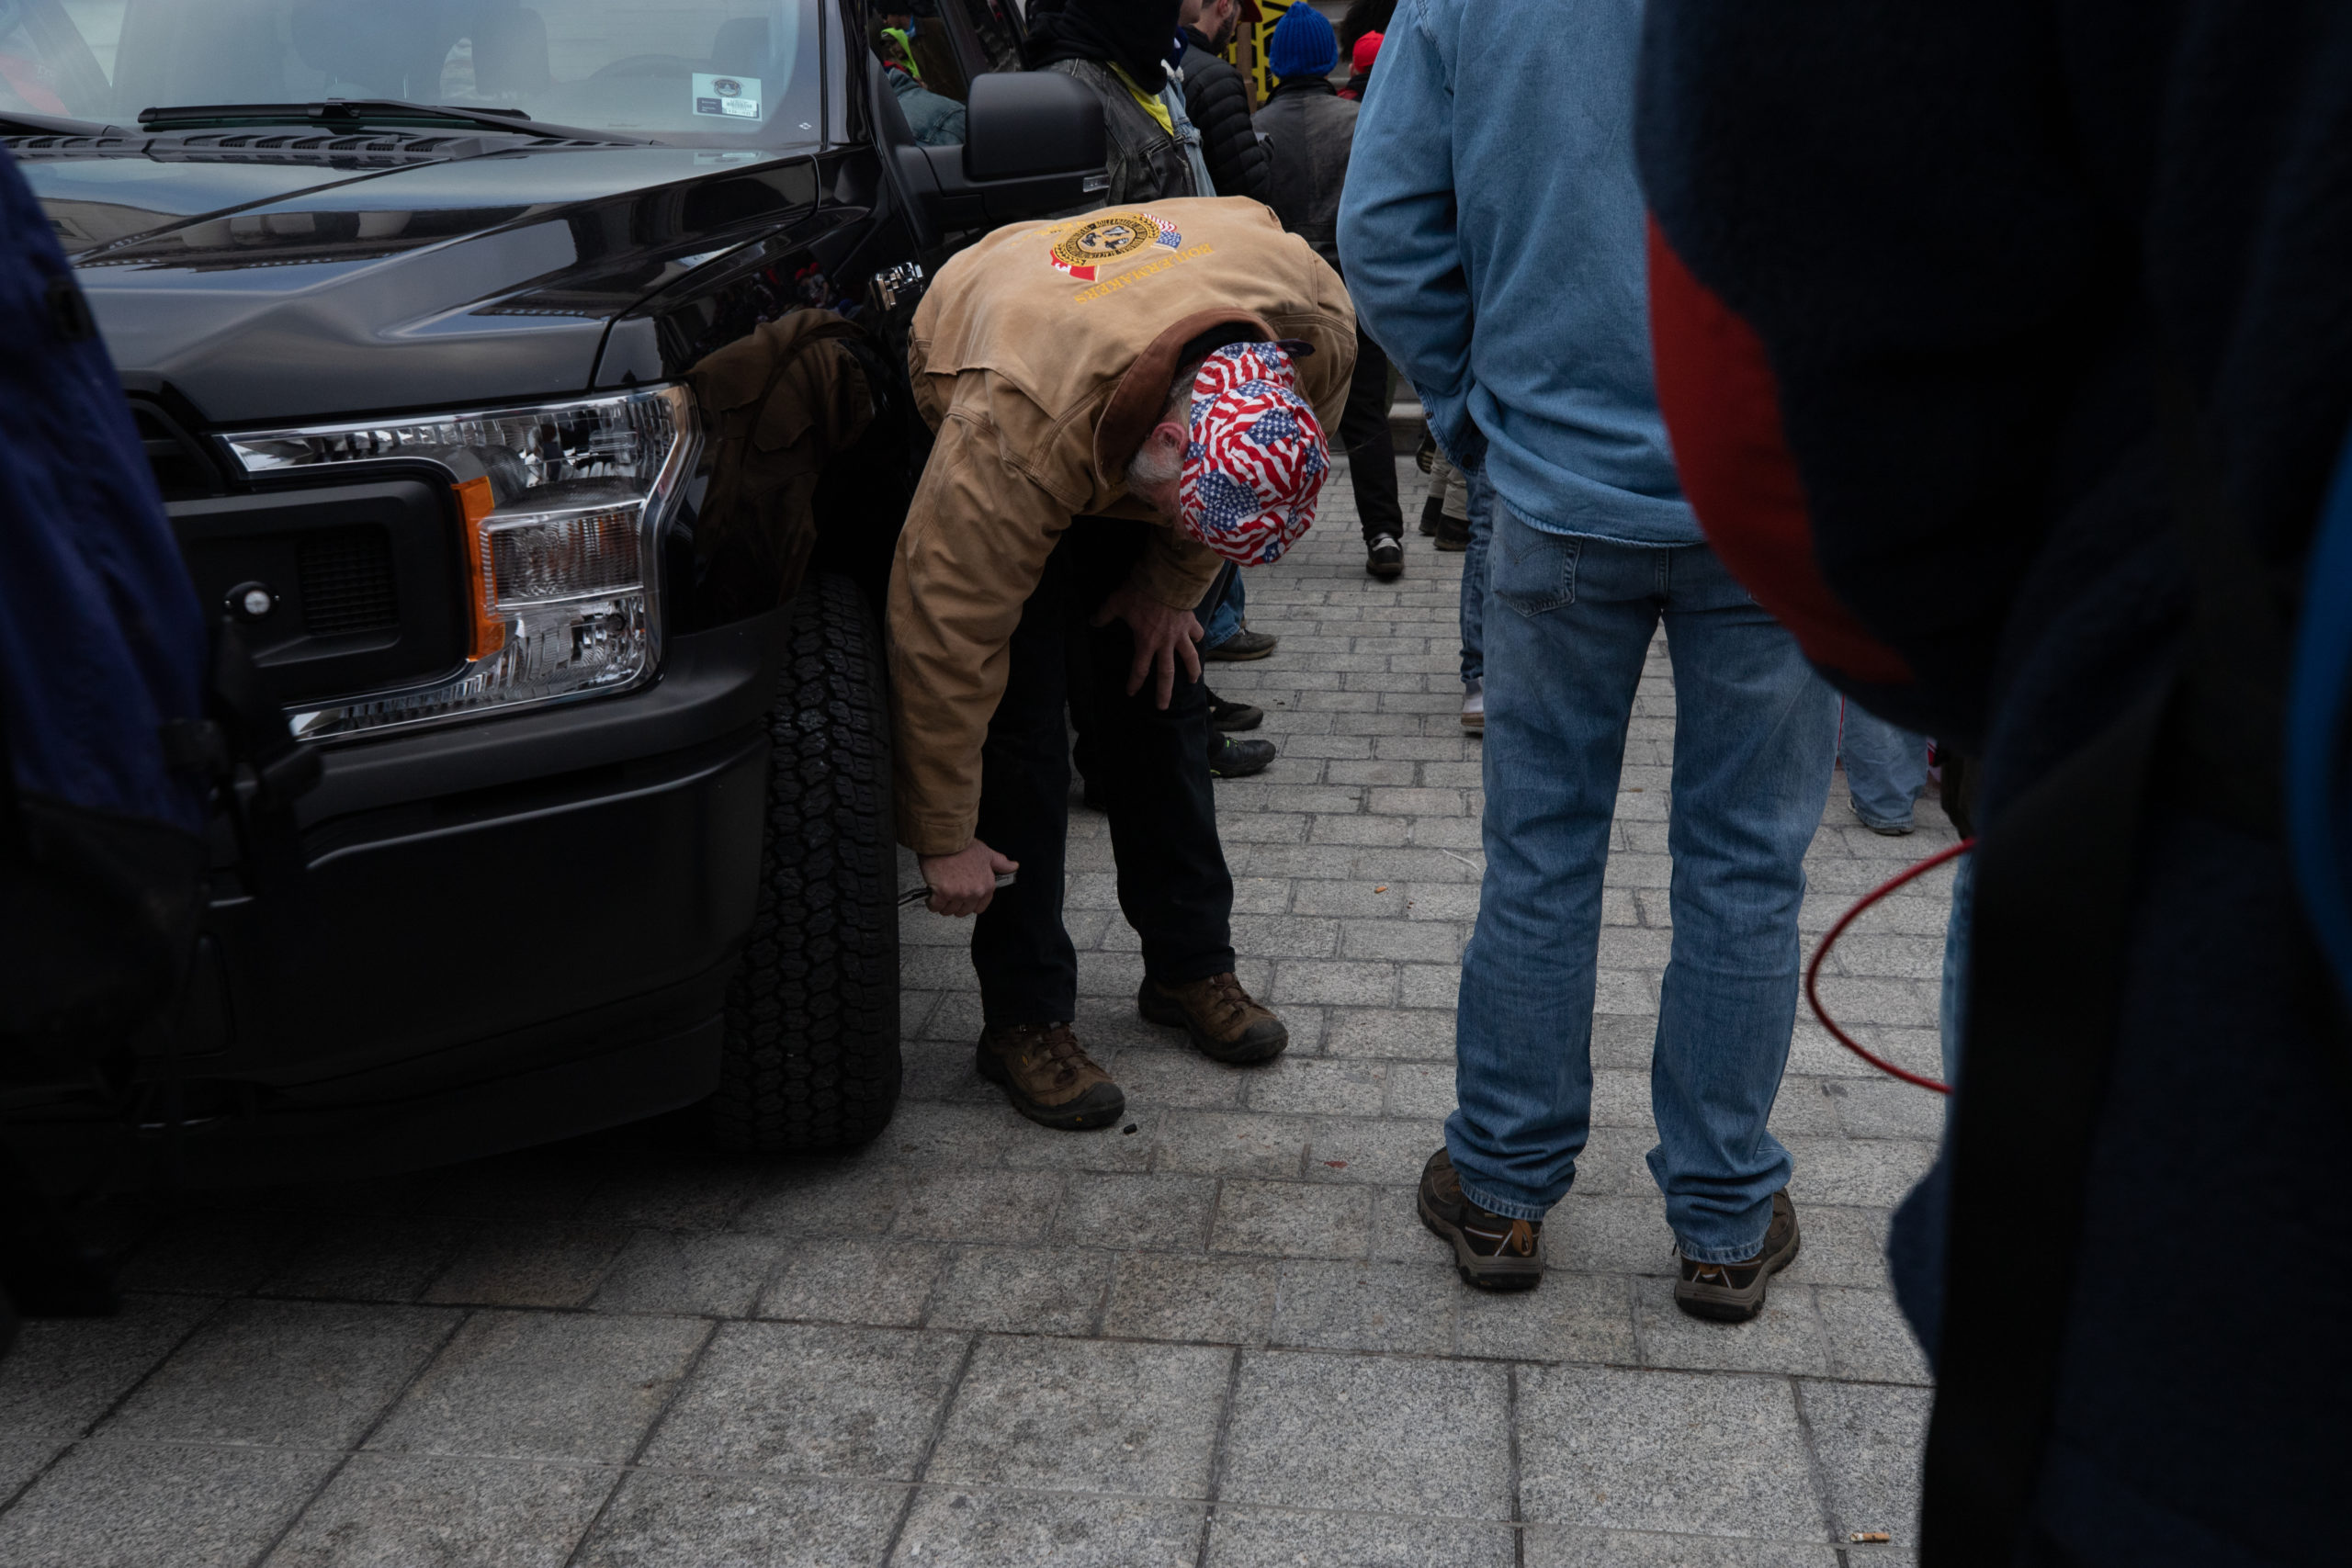 A protester slashed the tires on law enforcement vehicles in Washington, D.C. on Jan. 6, 2021. (Kaylee Greenlee - Daily Caller News Foundation)